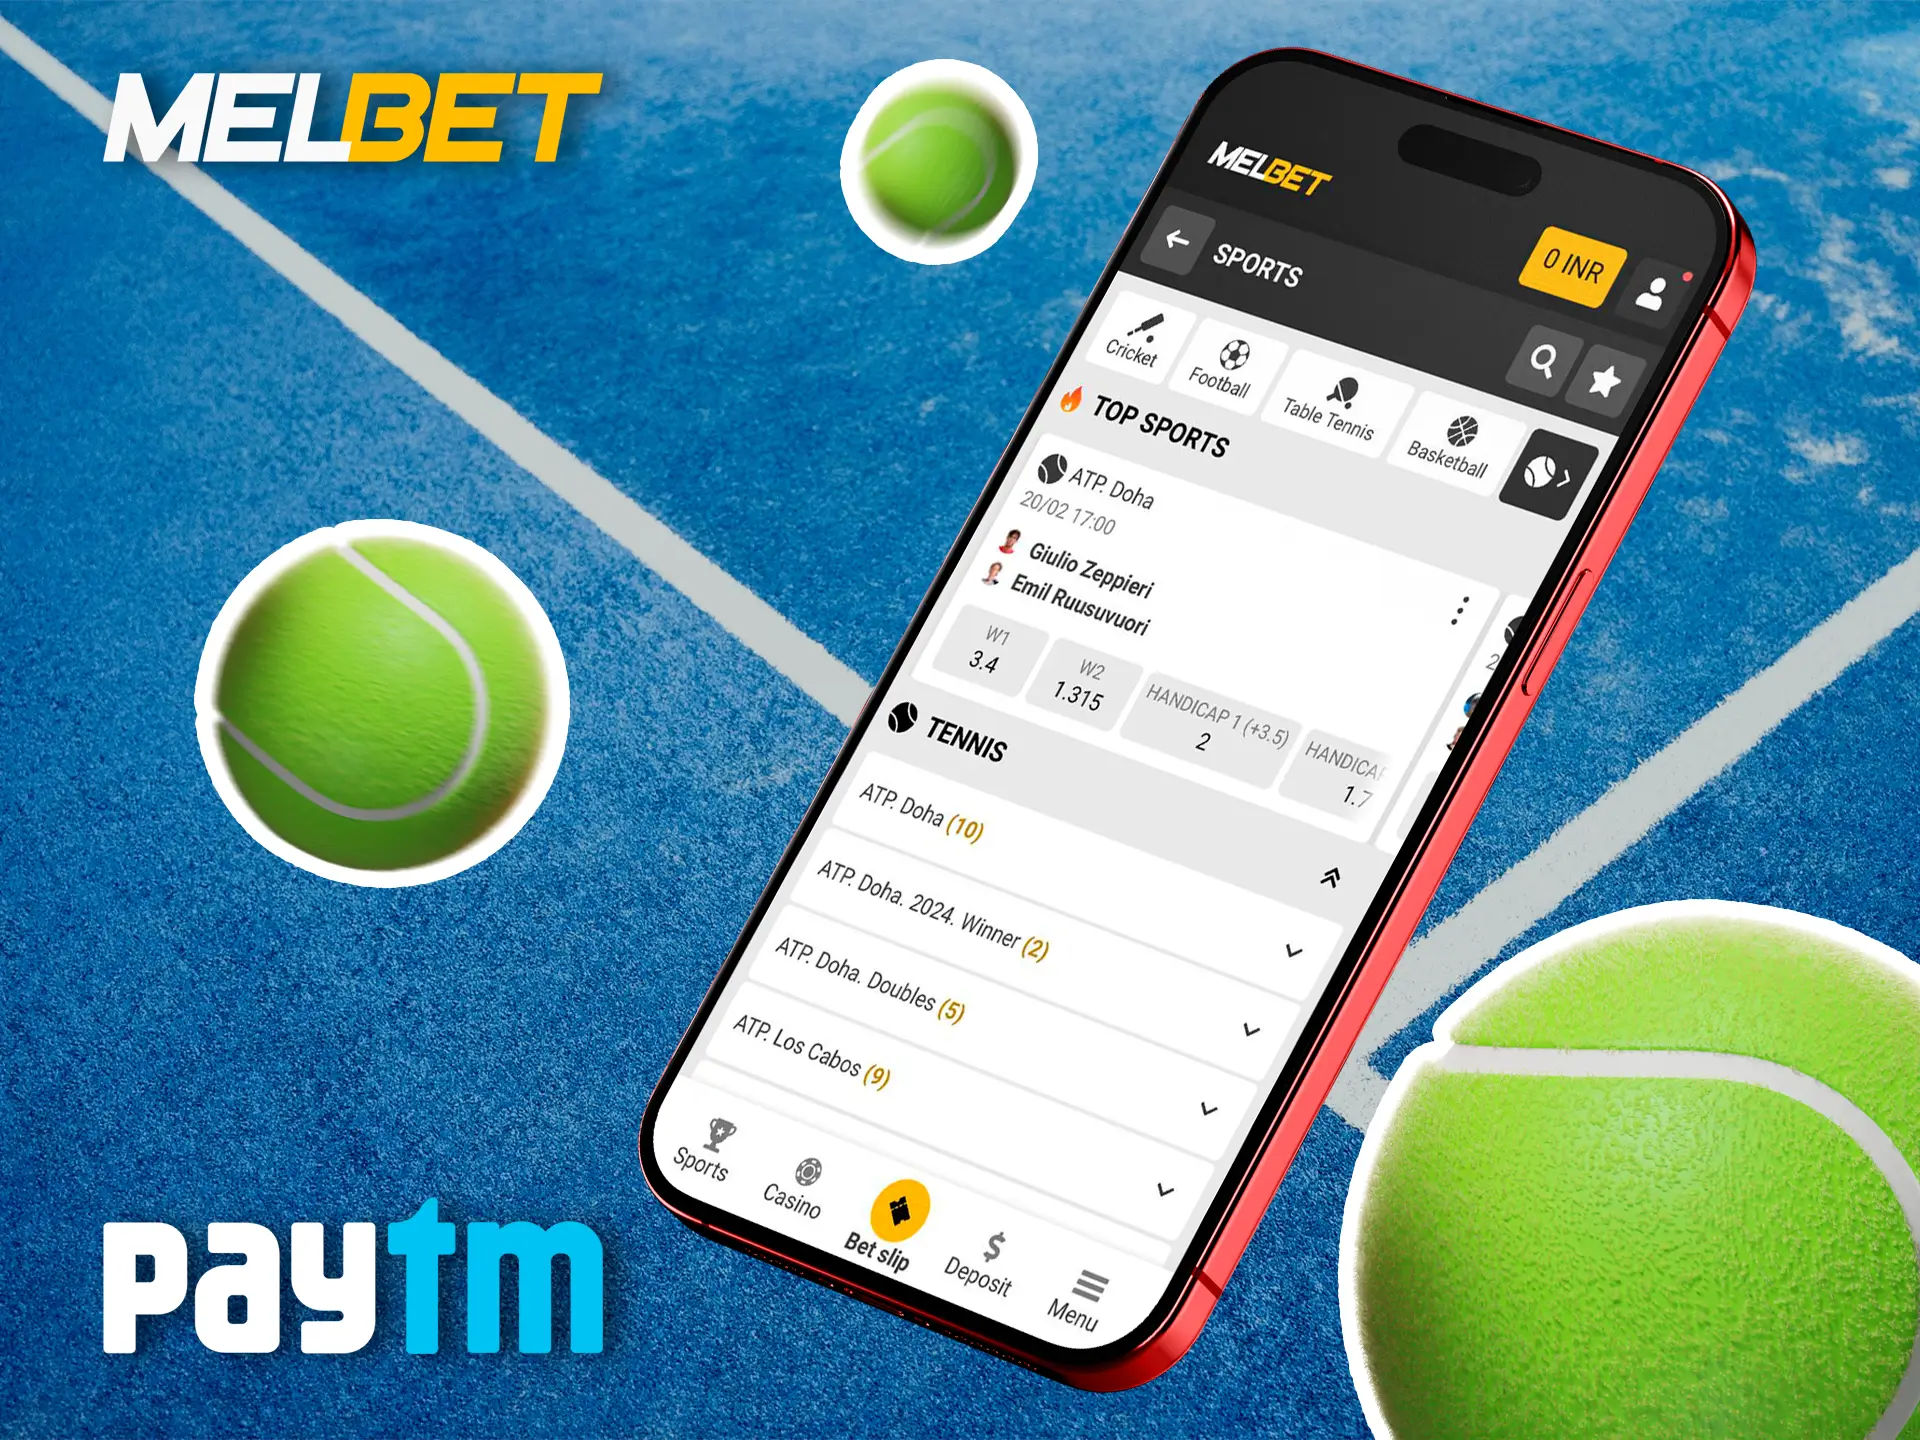 Use the Melbet app to bet on tennis and deposit via the convenient PayTM service.